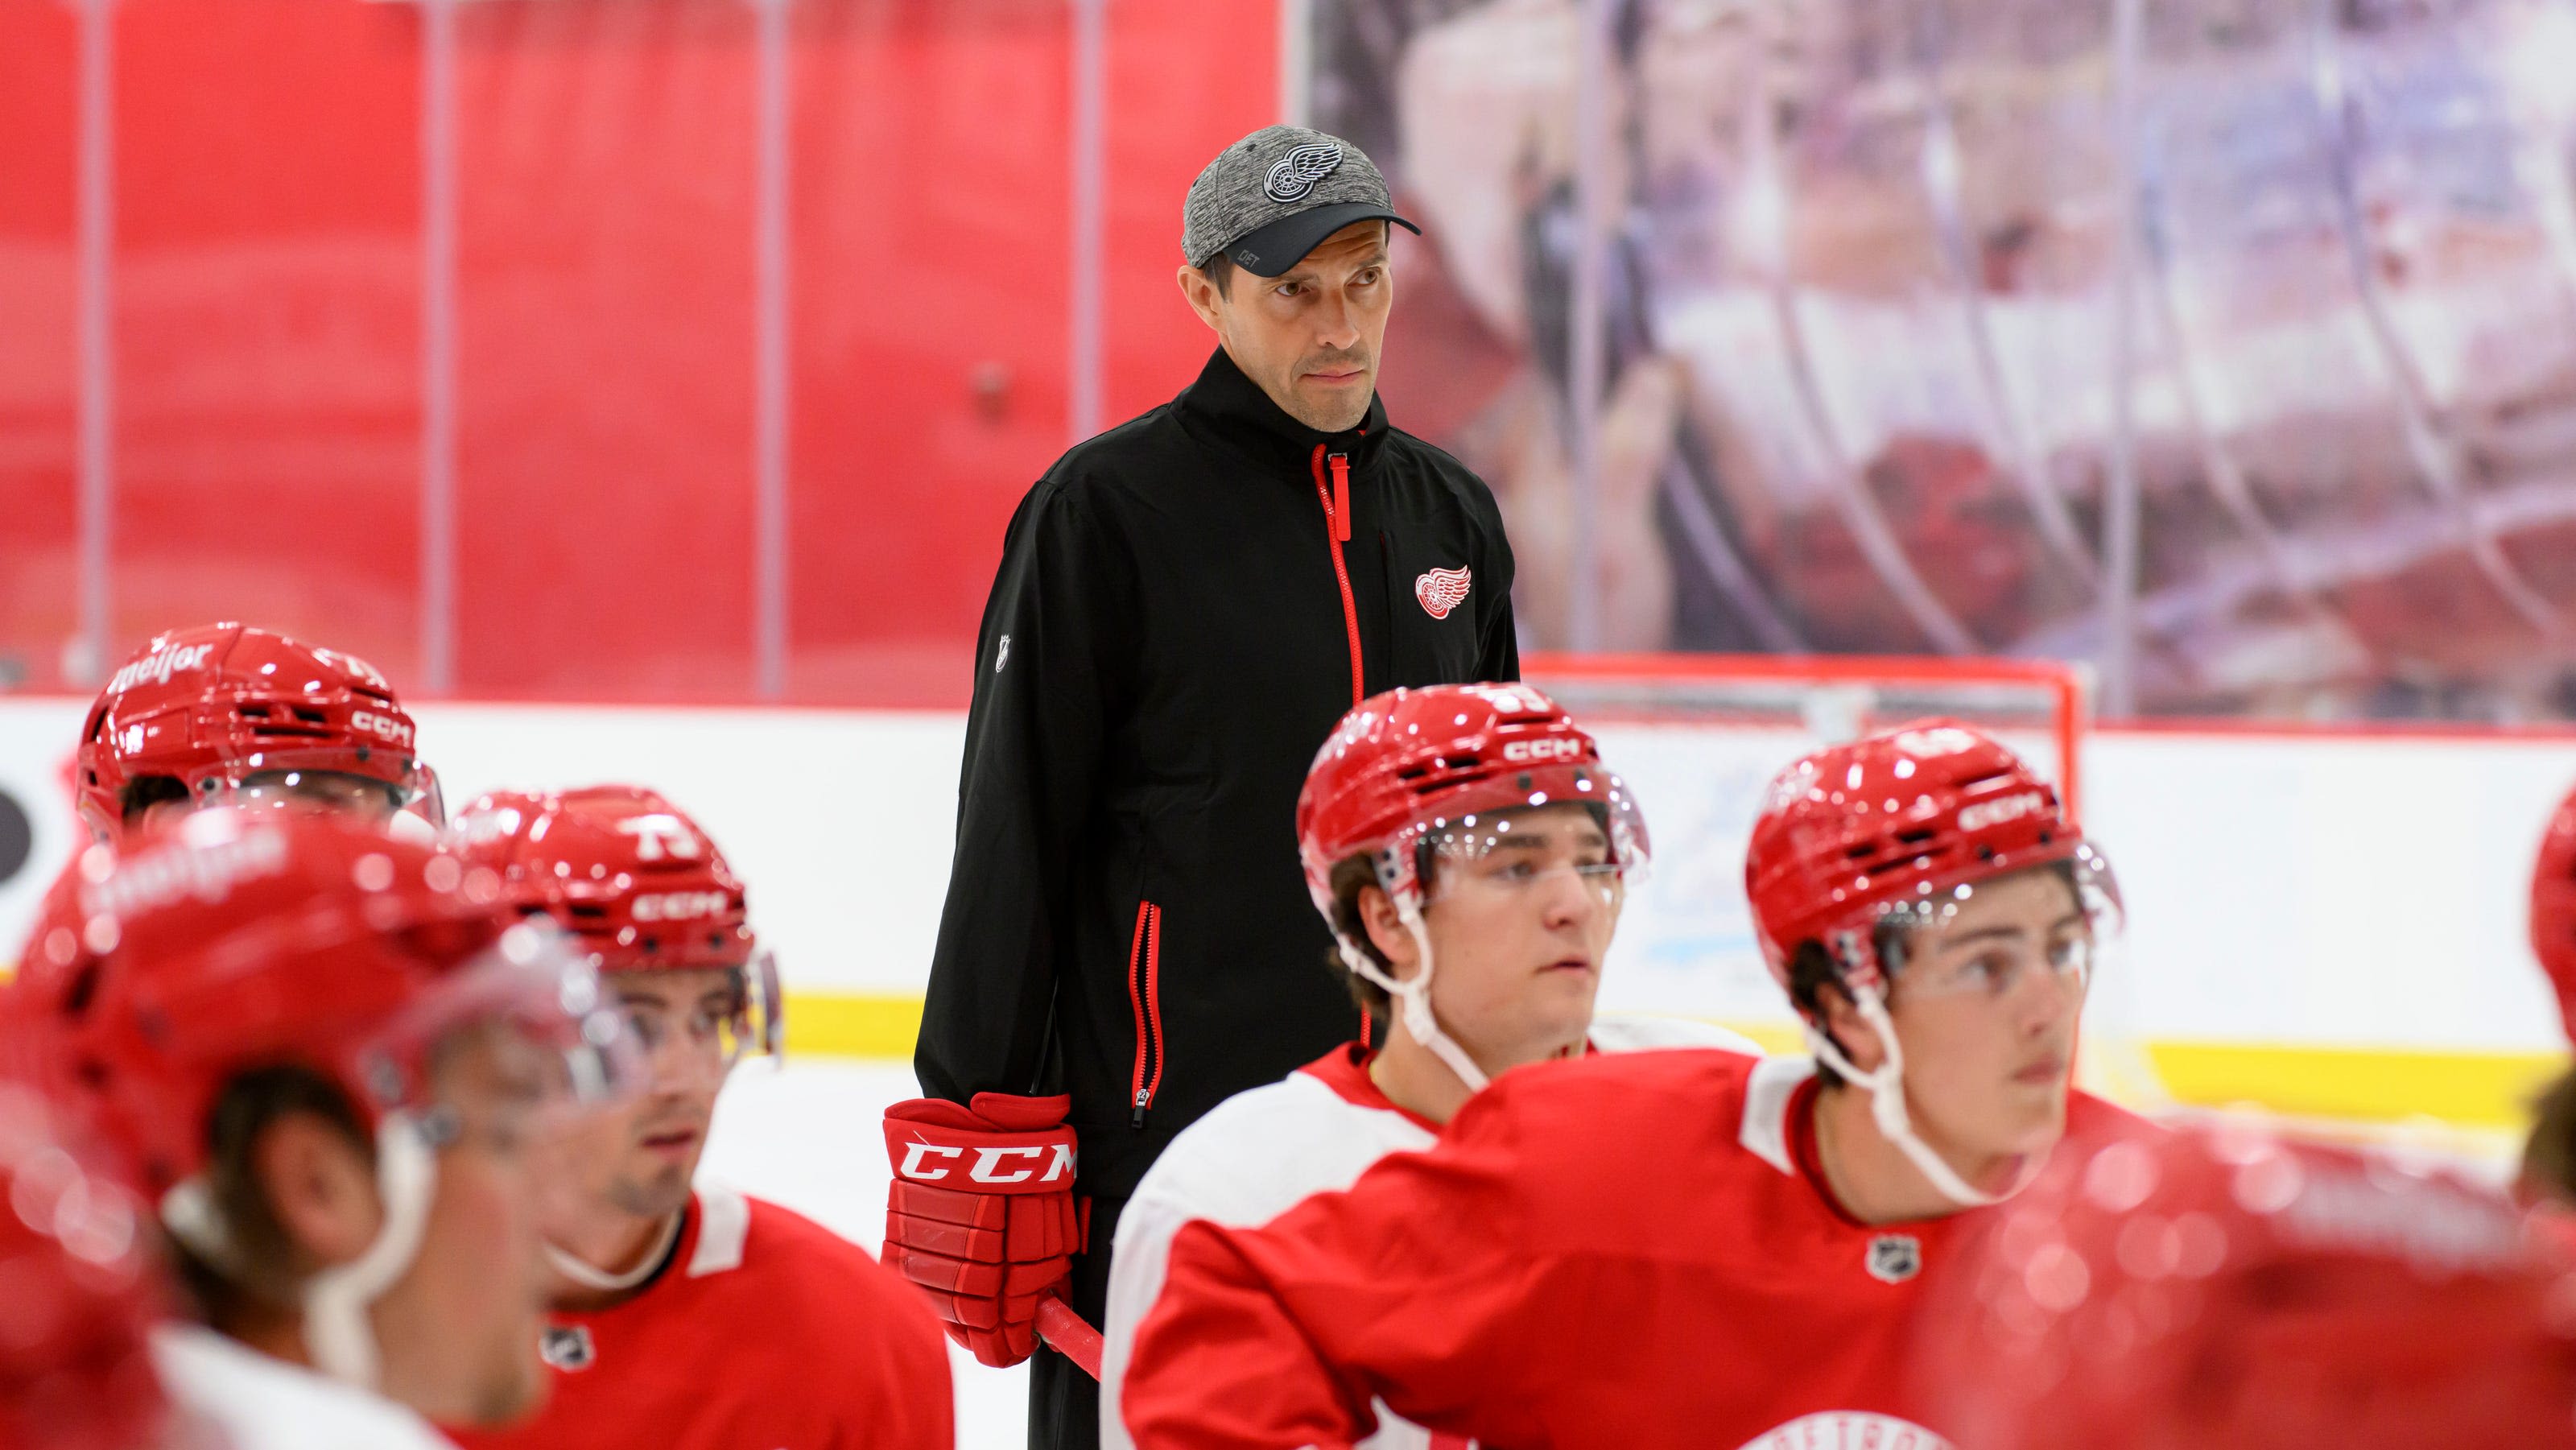 'Super cool': Wings prospects thrilled to see Pavel Datsyuk at development camp